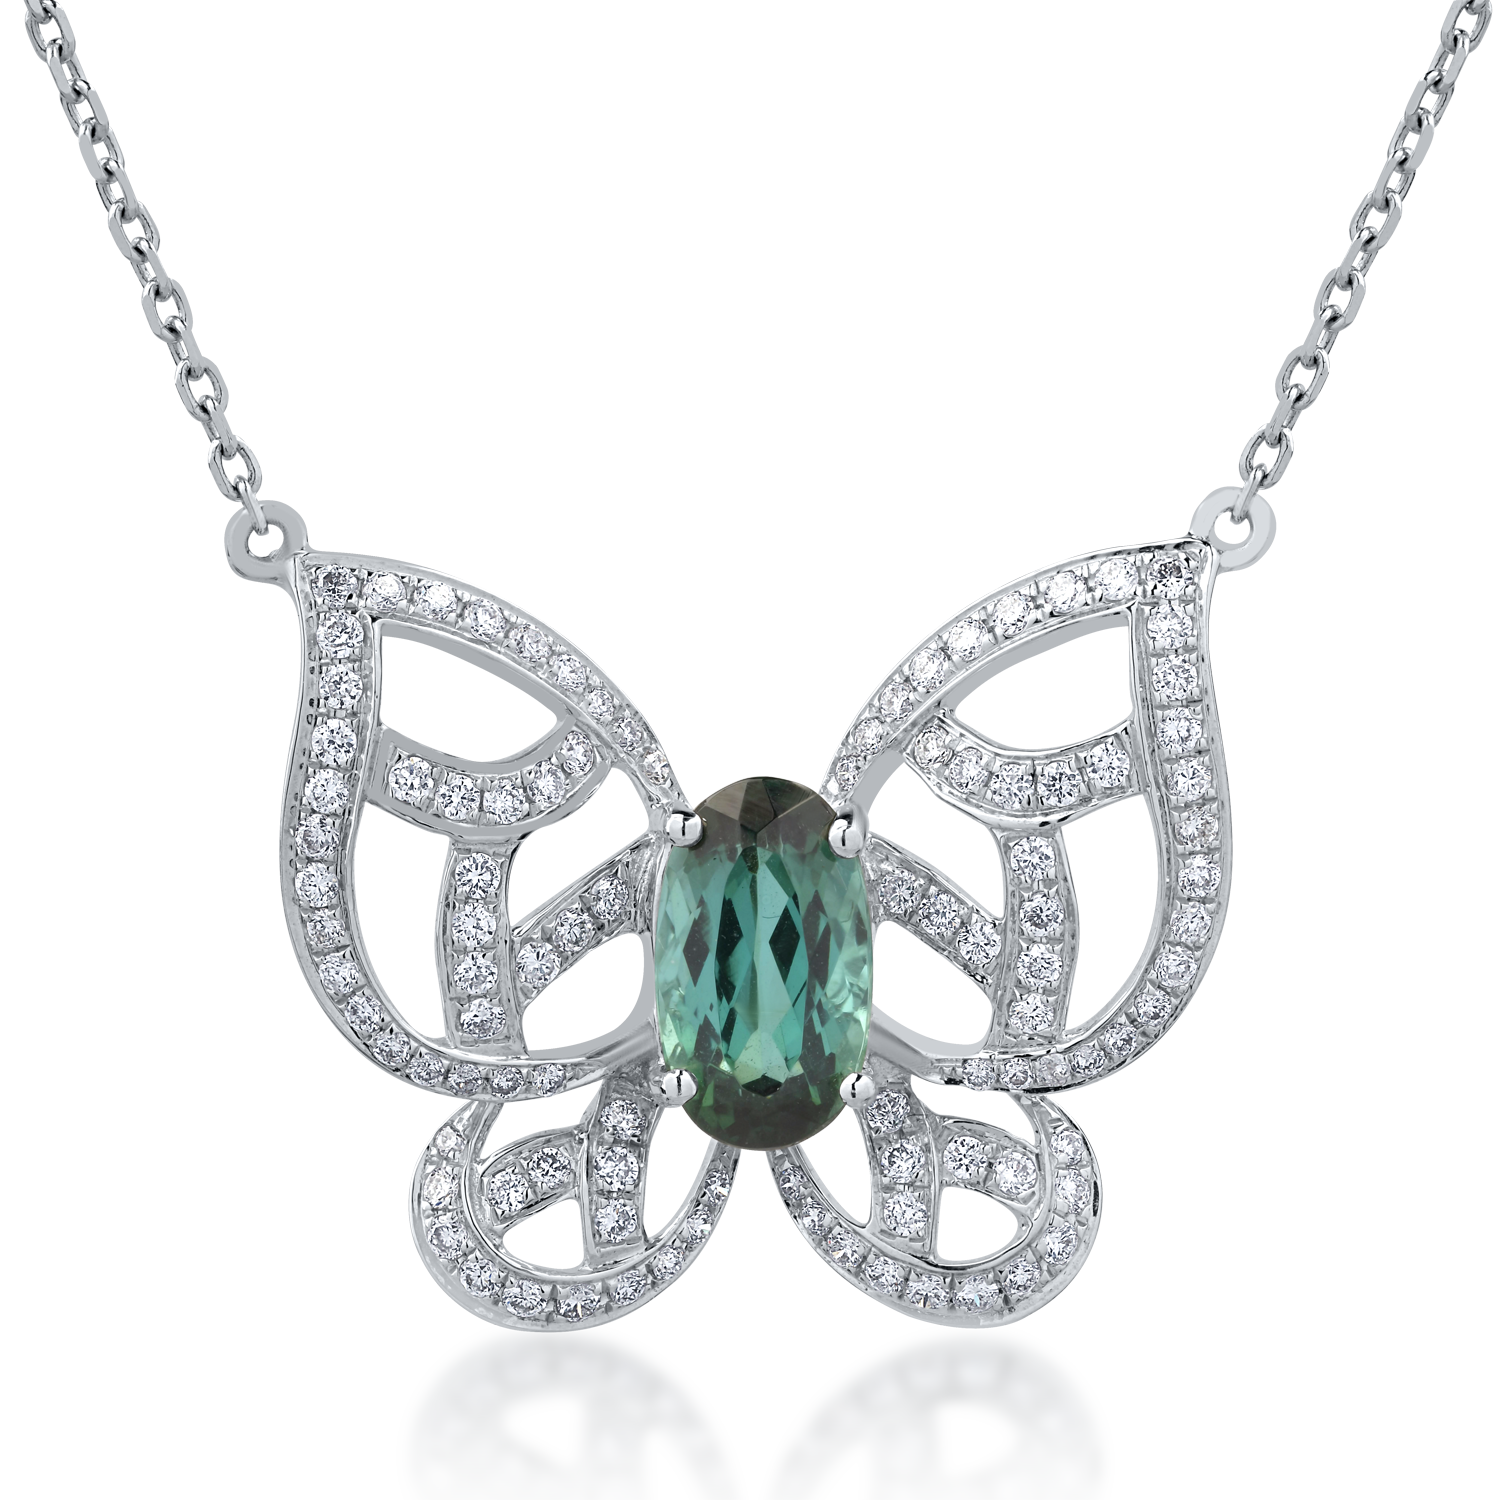 18K white gold butterfly necklace with 1.6ct green tourmaline and 0.54ct diamonds